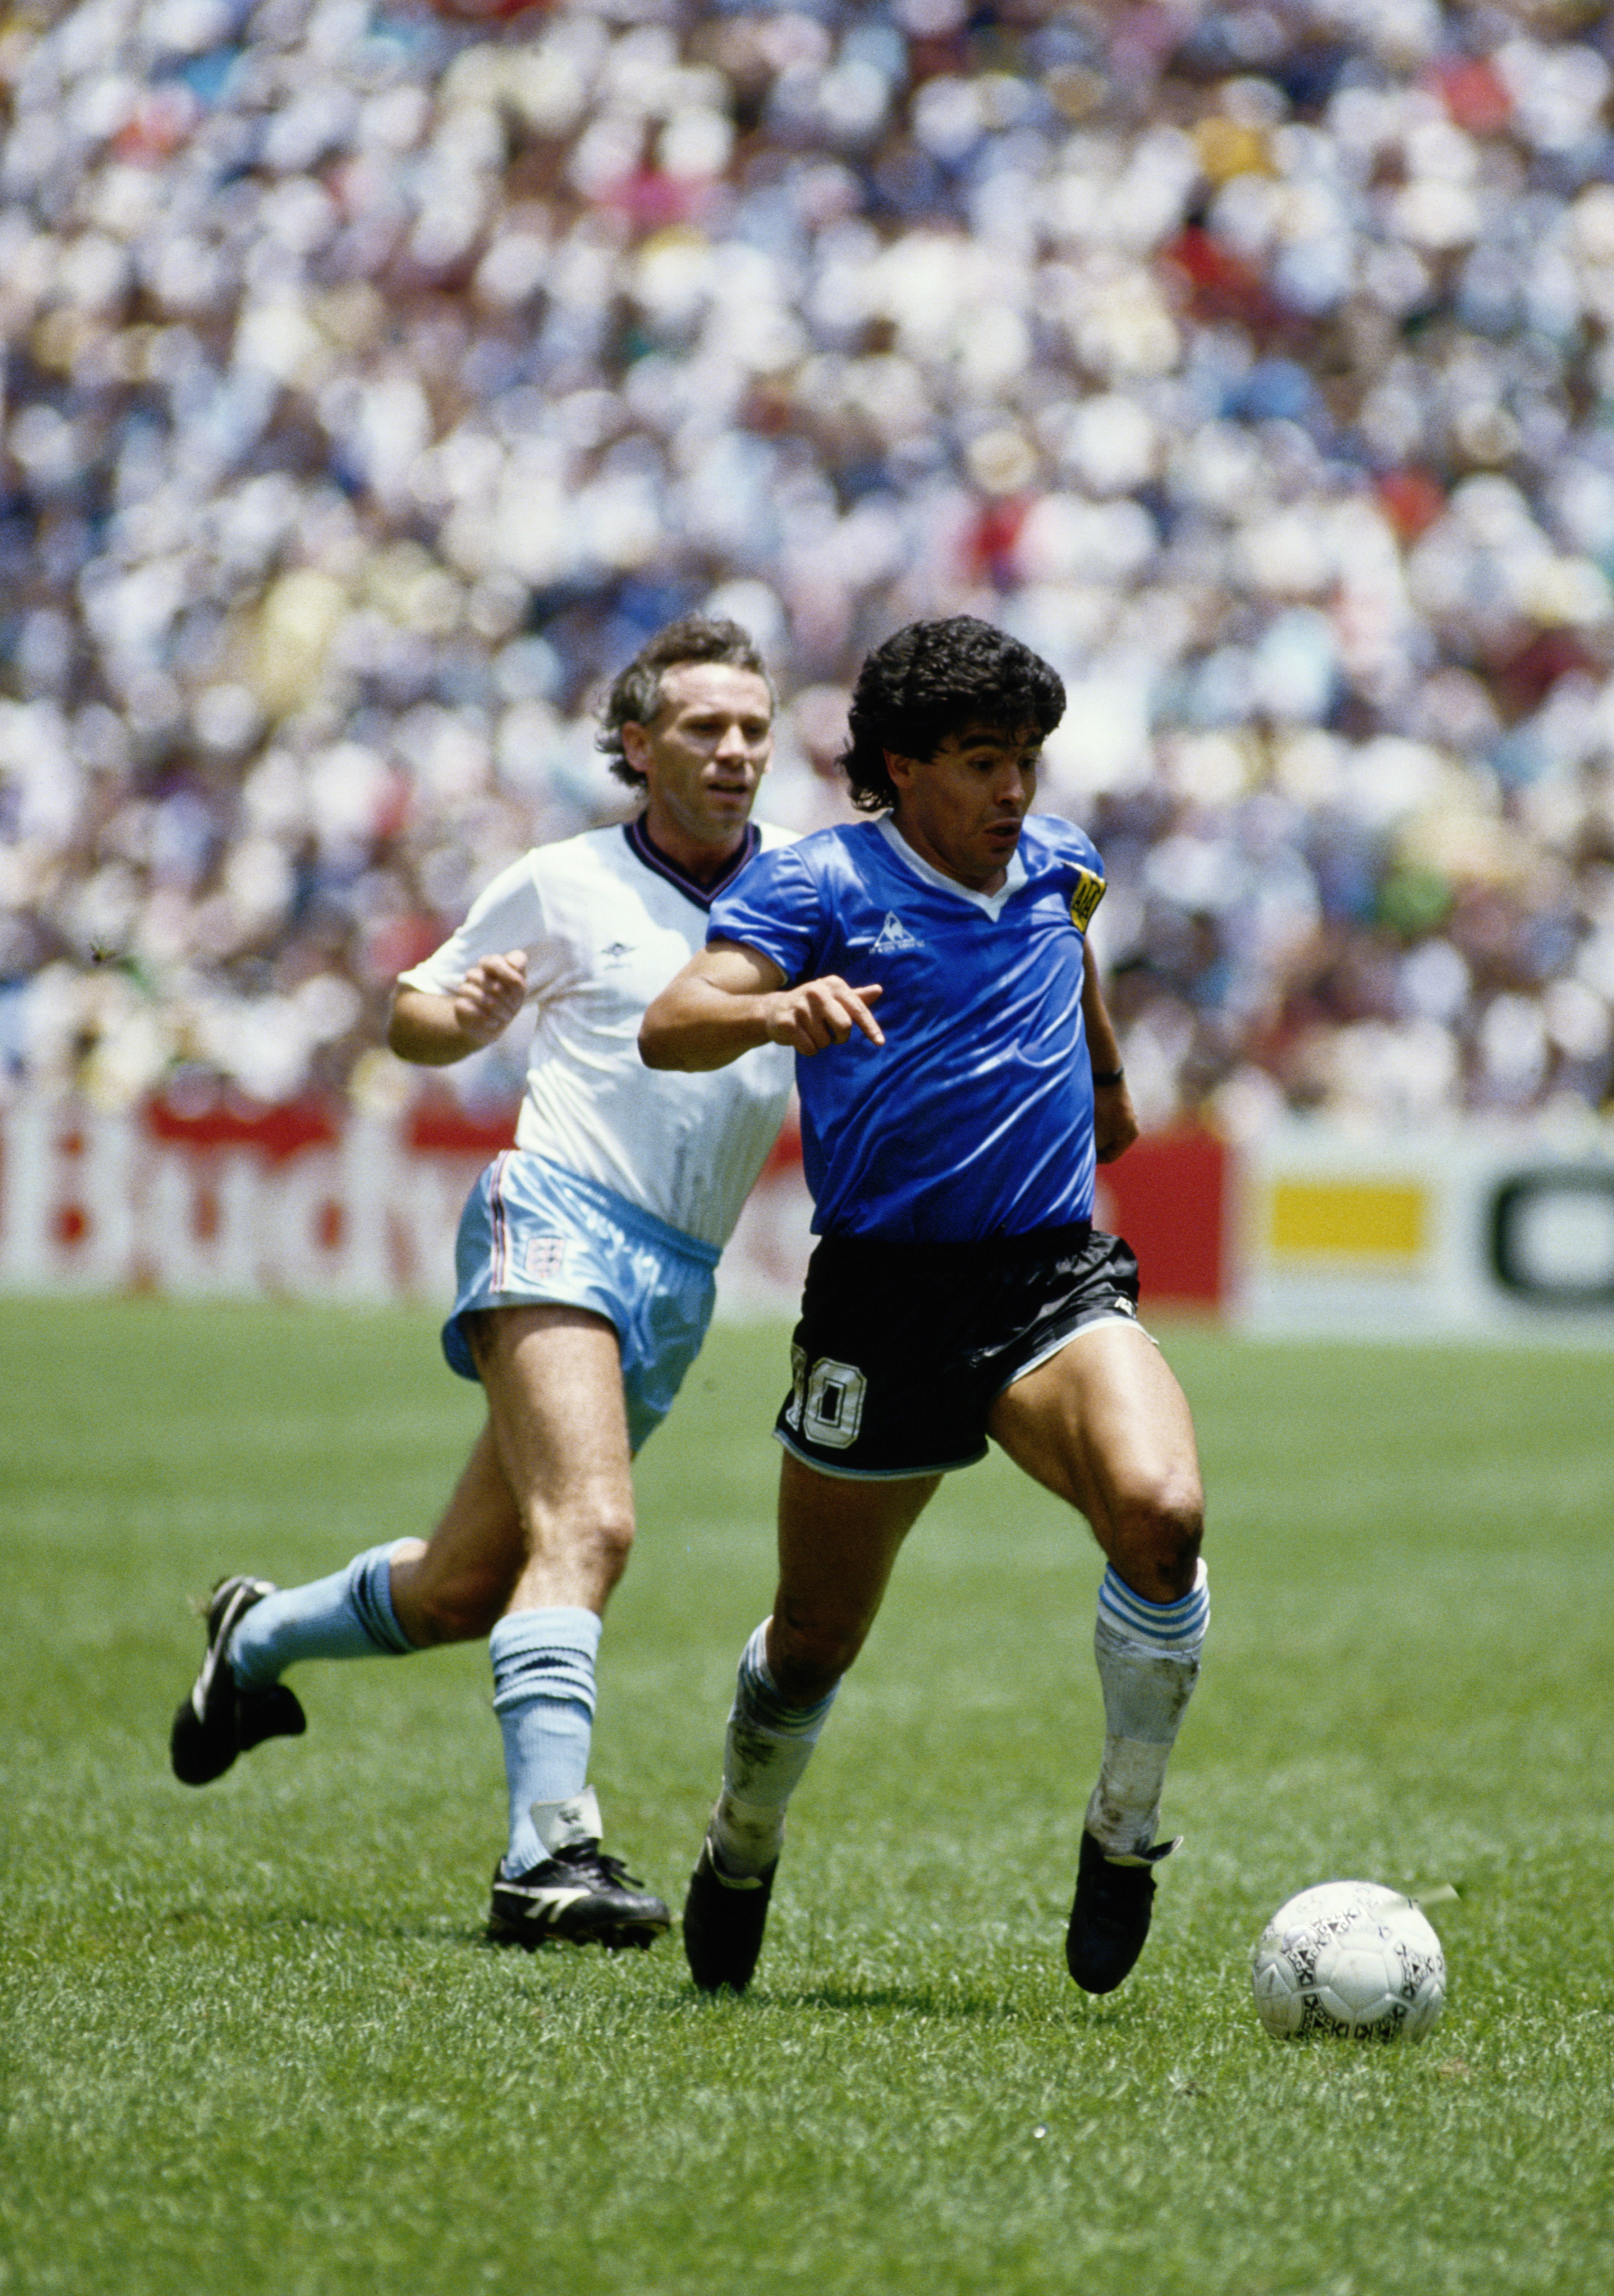 Diego Maradona of Argentina runs with the ball passed Peter Reid of England during the 1986 FIFA World Cup Quarter Final on 22 June 1986 at the Azteca Stadium in Mexico City, Mexico. Argentina defeated England 2-1 in the infamous Hand of God game. (Photo